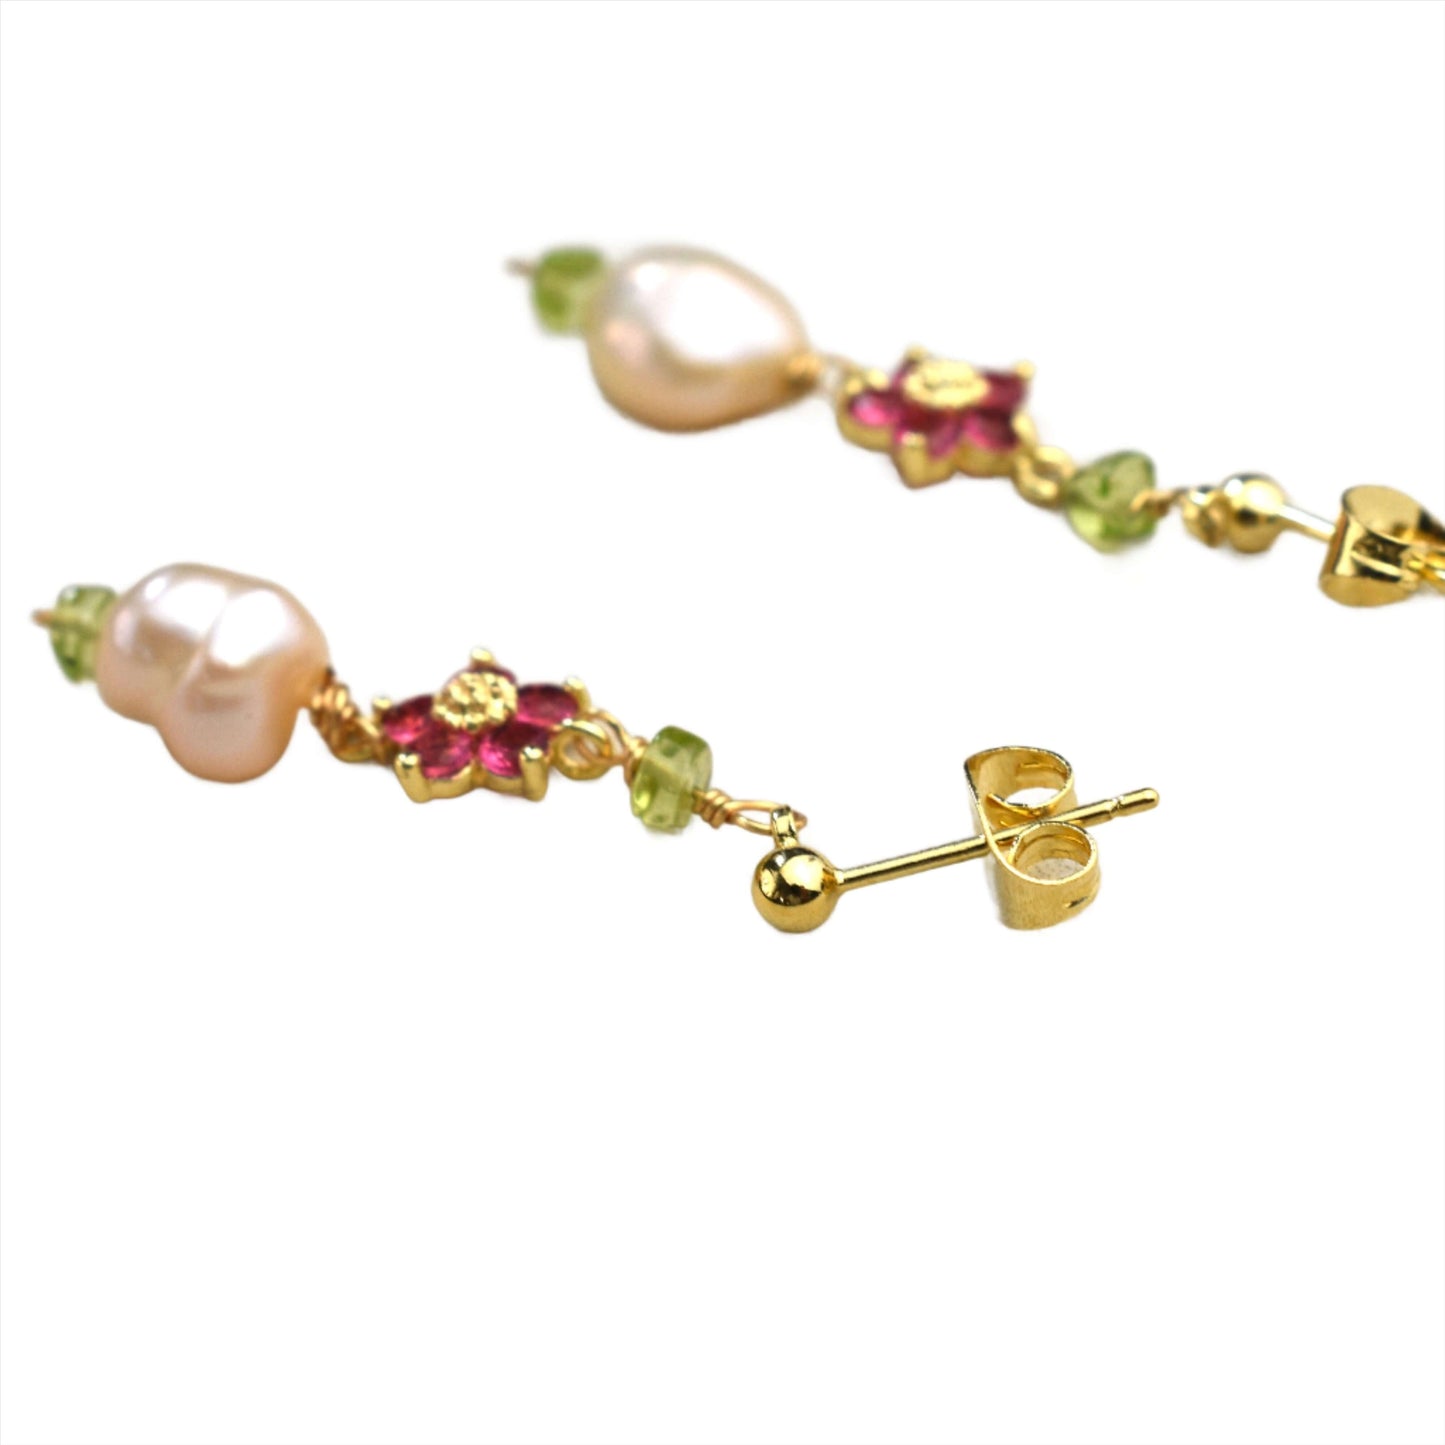 Pearl and peridot earring made of 14k gold filled is shown against a white background